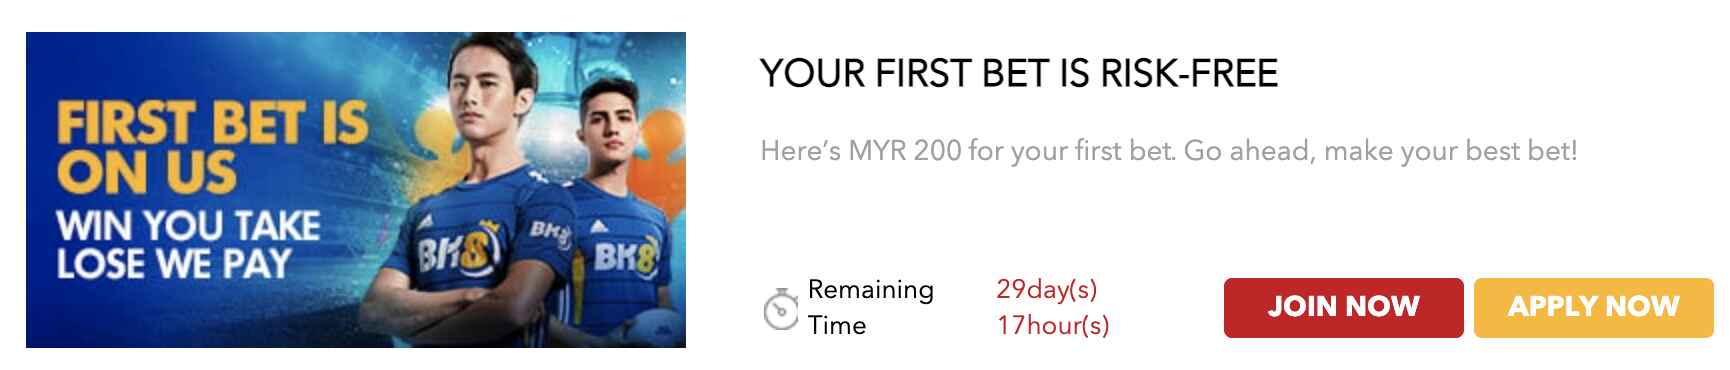 bk8 malaysia - risk-free first bet offer